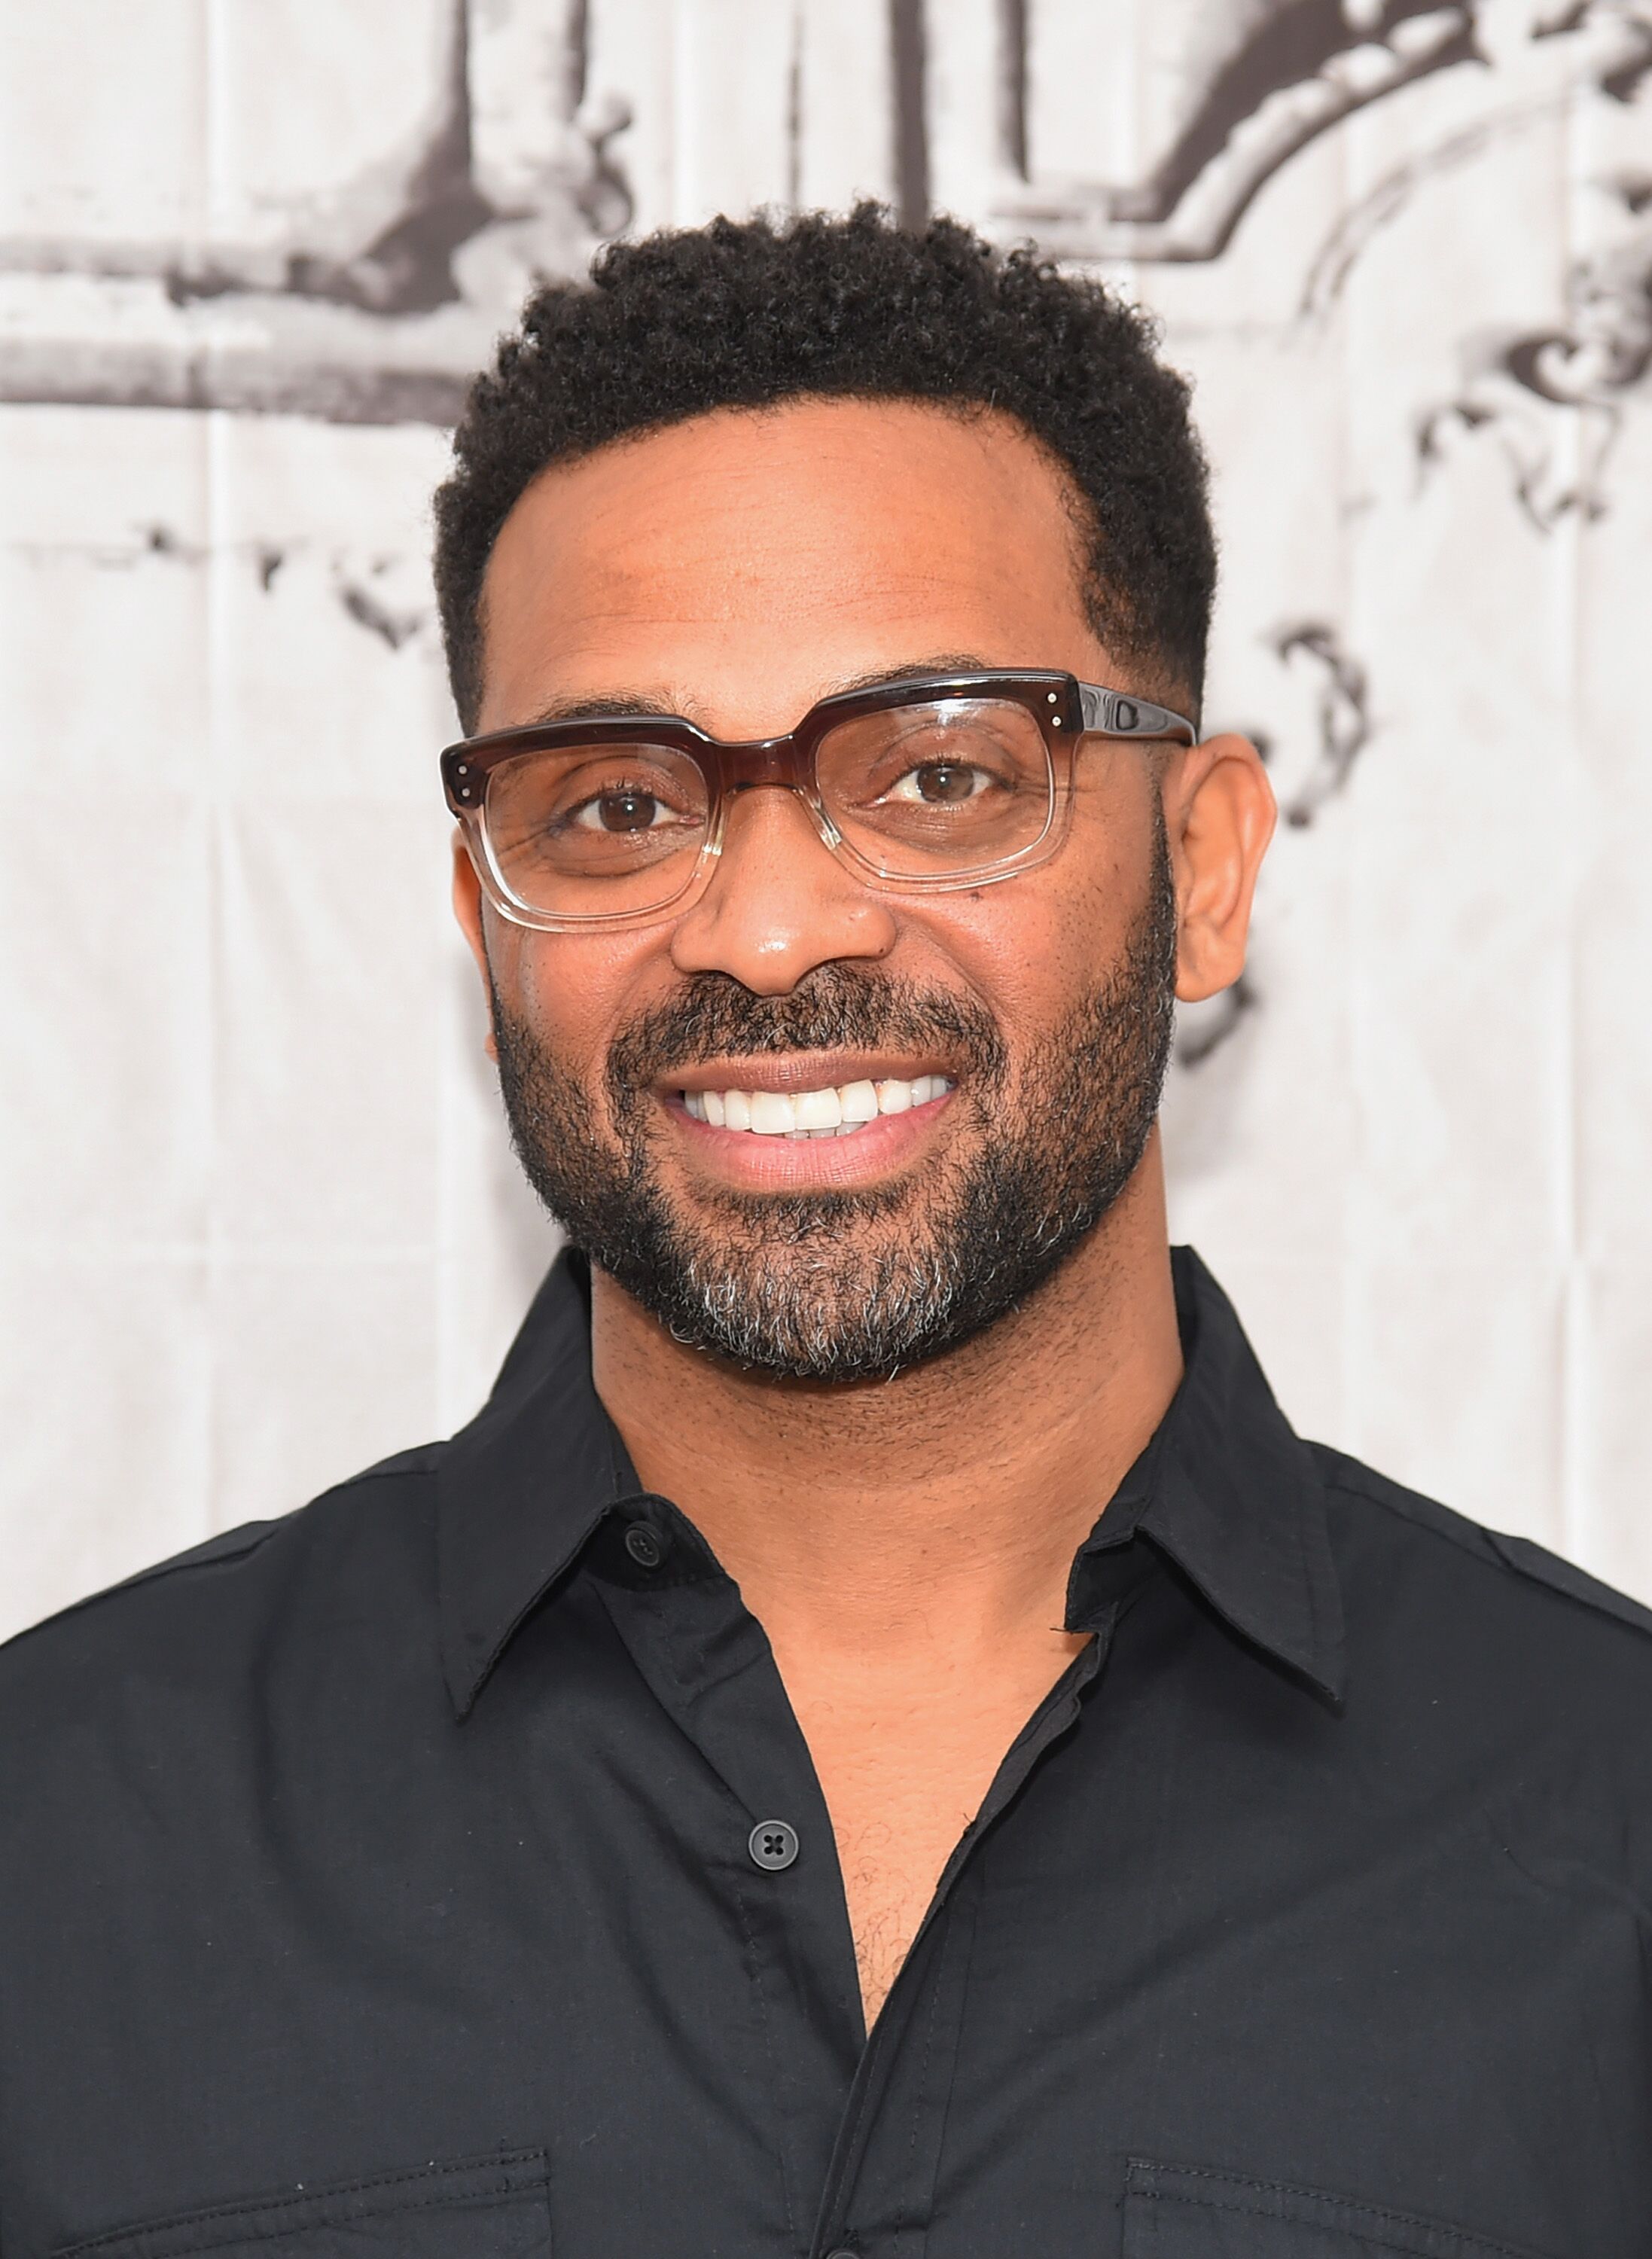 Mike Epps attends the AOL BUILD Speaker Series Presents: "Survivor's Remorse" at AOL Studios in New York on July 29, 2015. | Photo: Getty Images